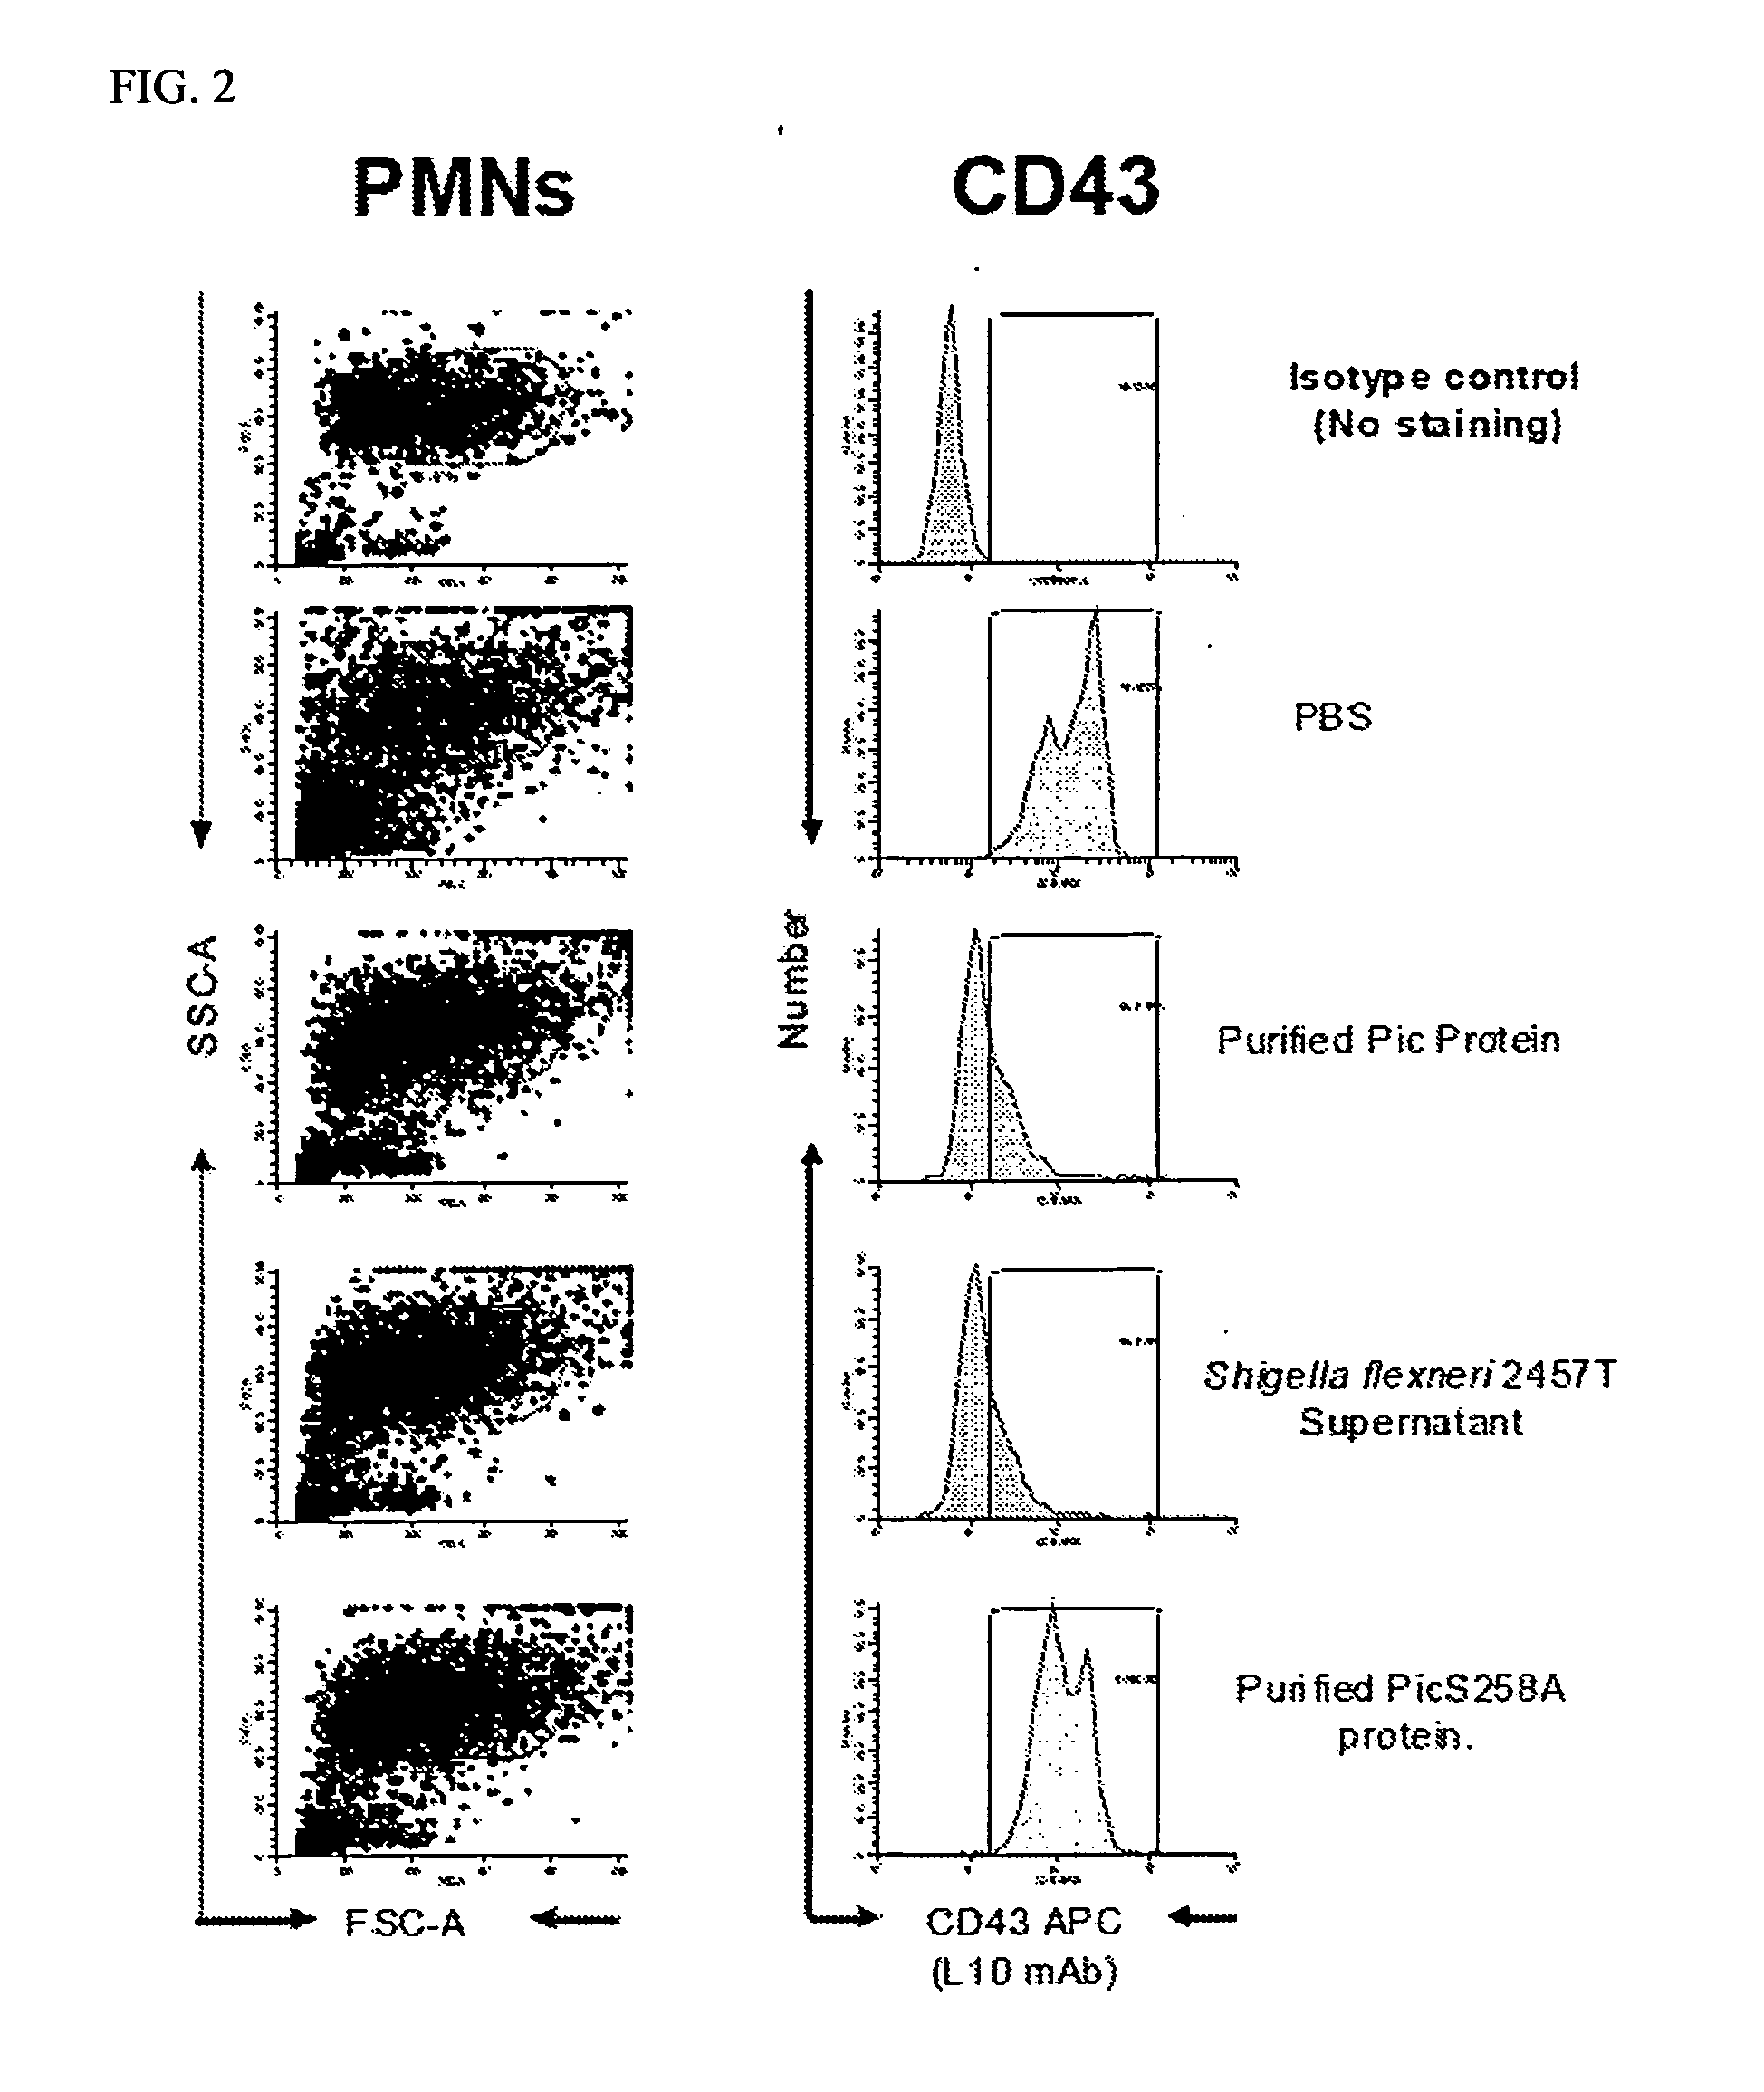 Novel compositions and methods for treating inflammatory bowel disease and airway inflammation